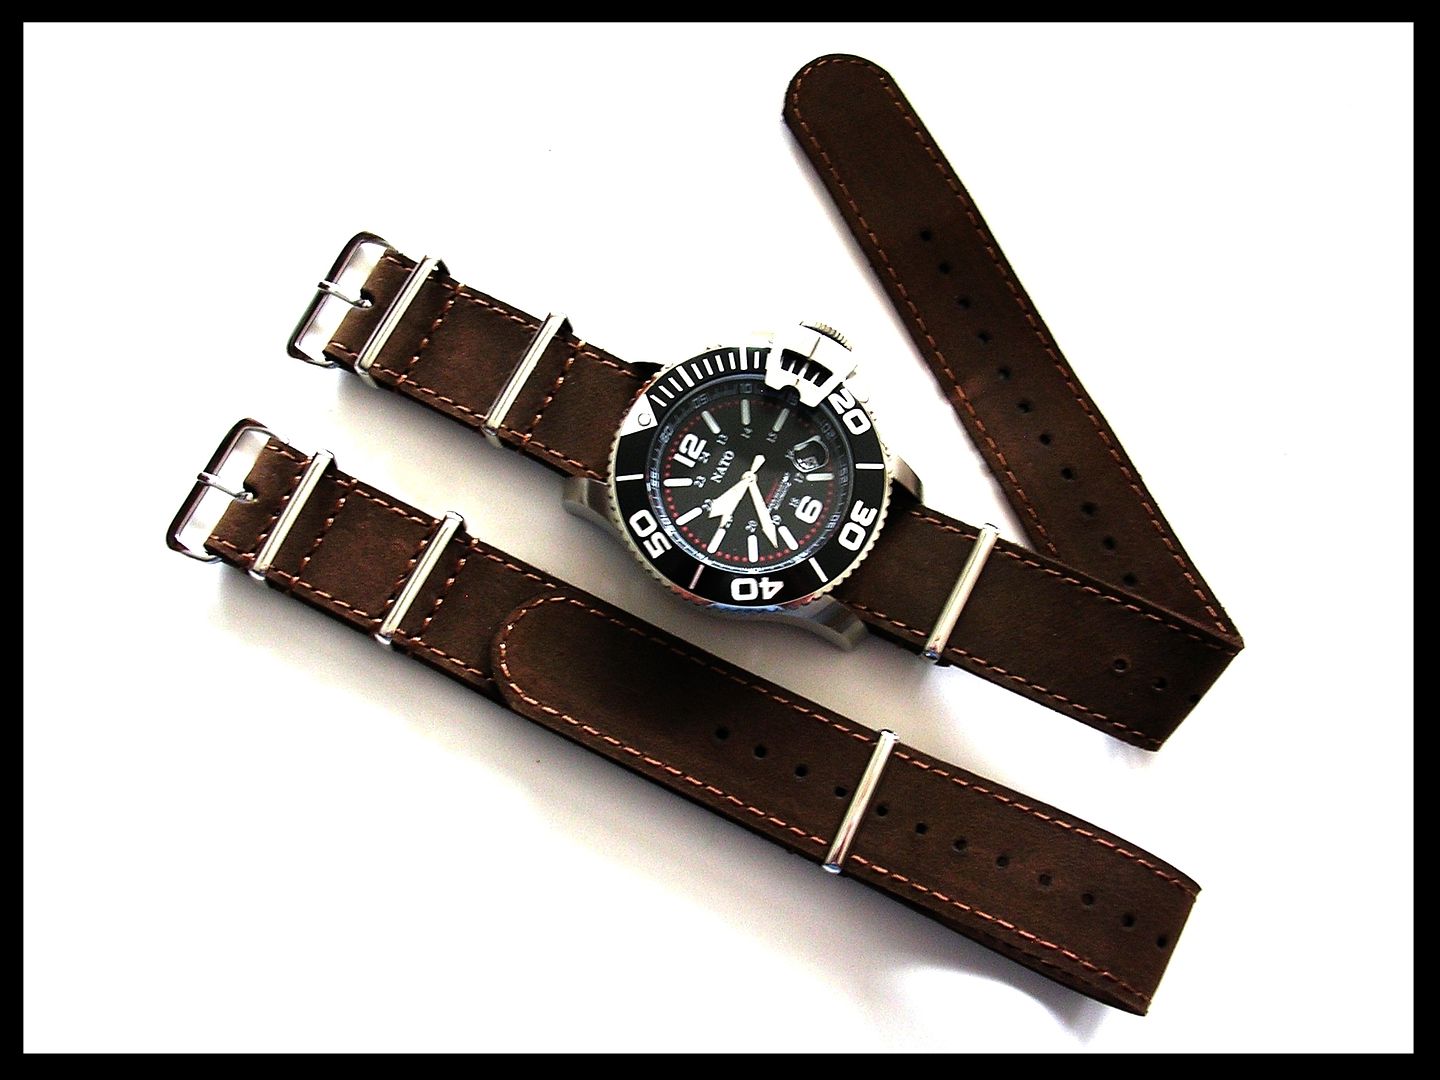 NATO G10 ® Bomber Leather Aviator Pilot watch band Military RAF strap ...